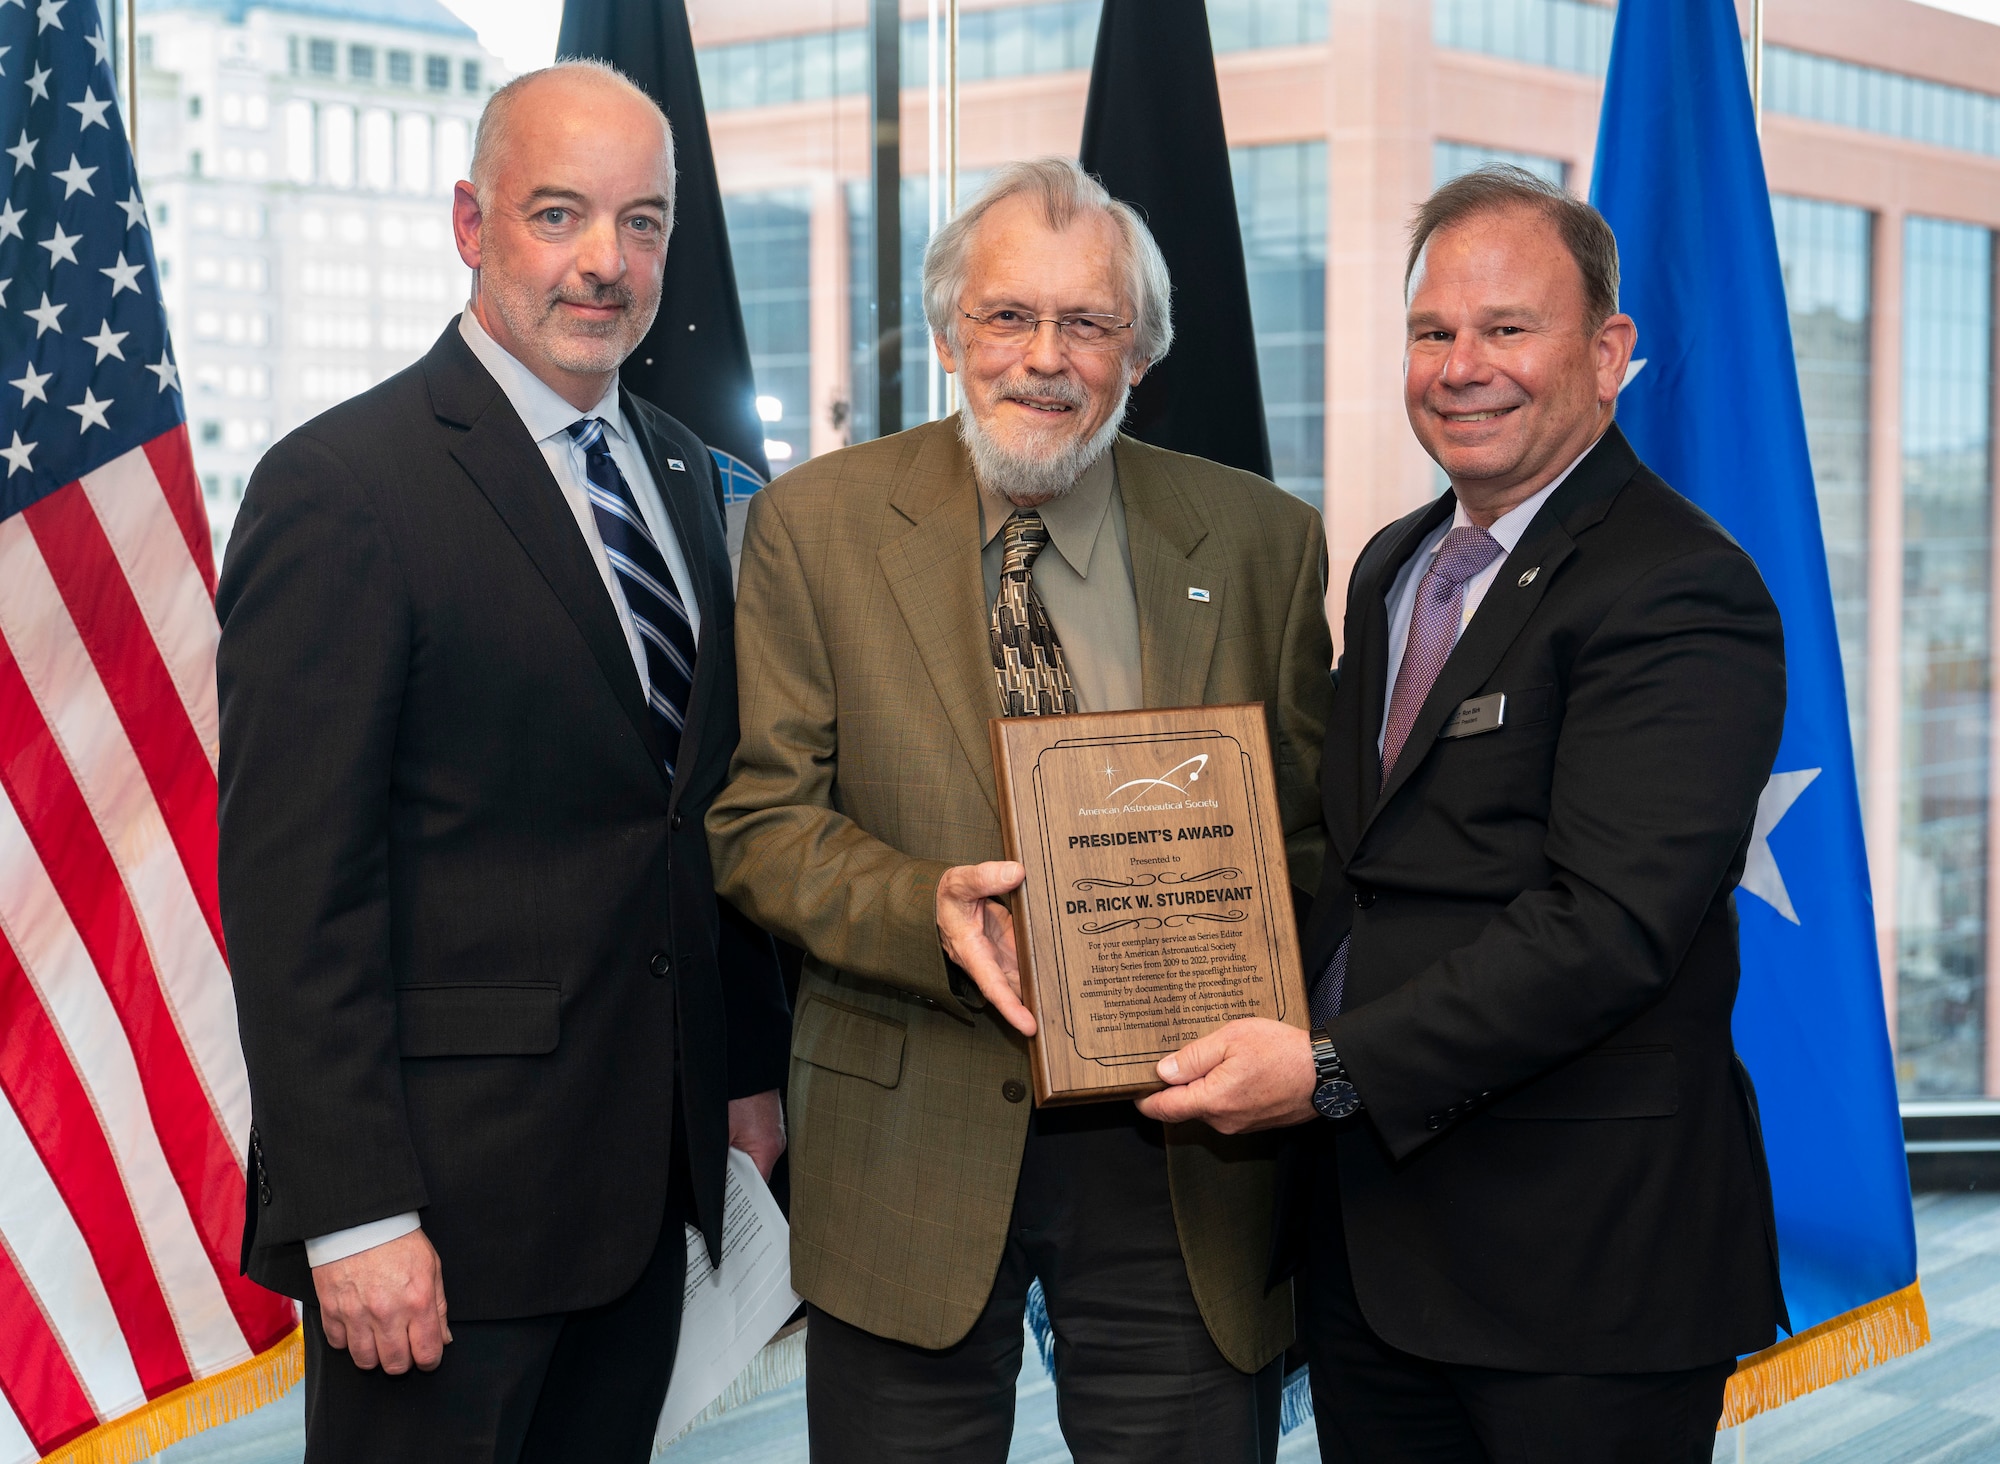 Dr. Rick Sturdevant, Space Training and Readiness Command historian, is presented the American Astronautical Society President's Award for his work as series editor for the International Academy of Astronautics History Series during a ceremony at STARCOM Headquarters